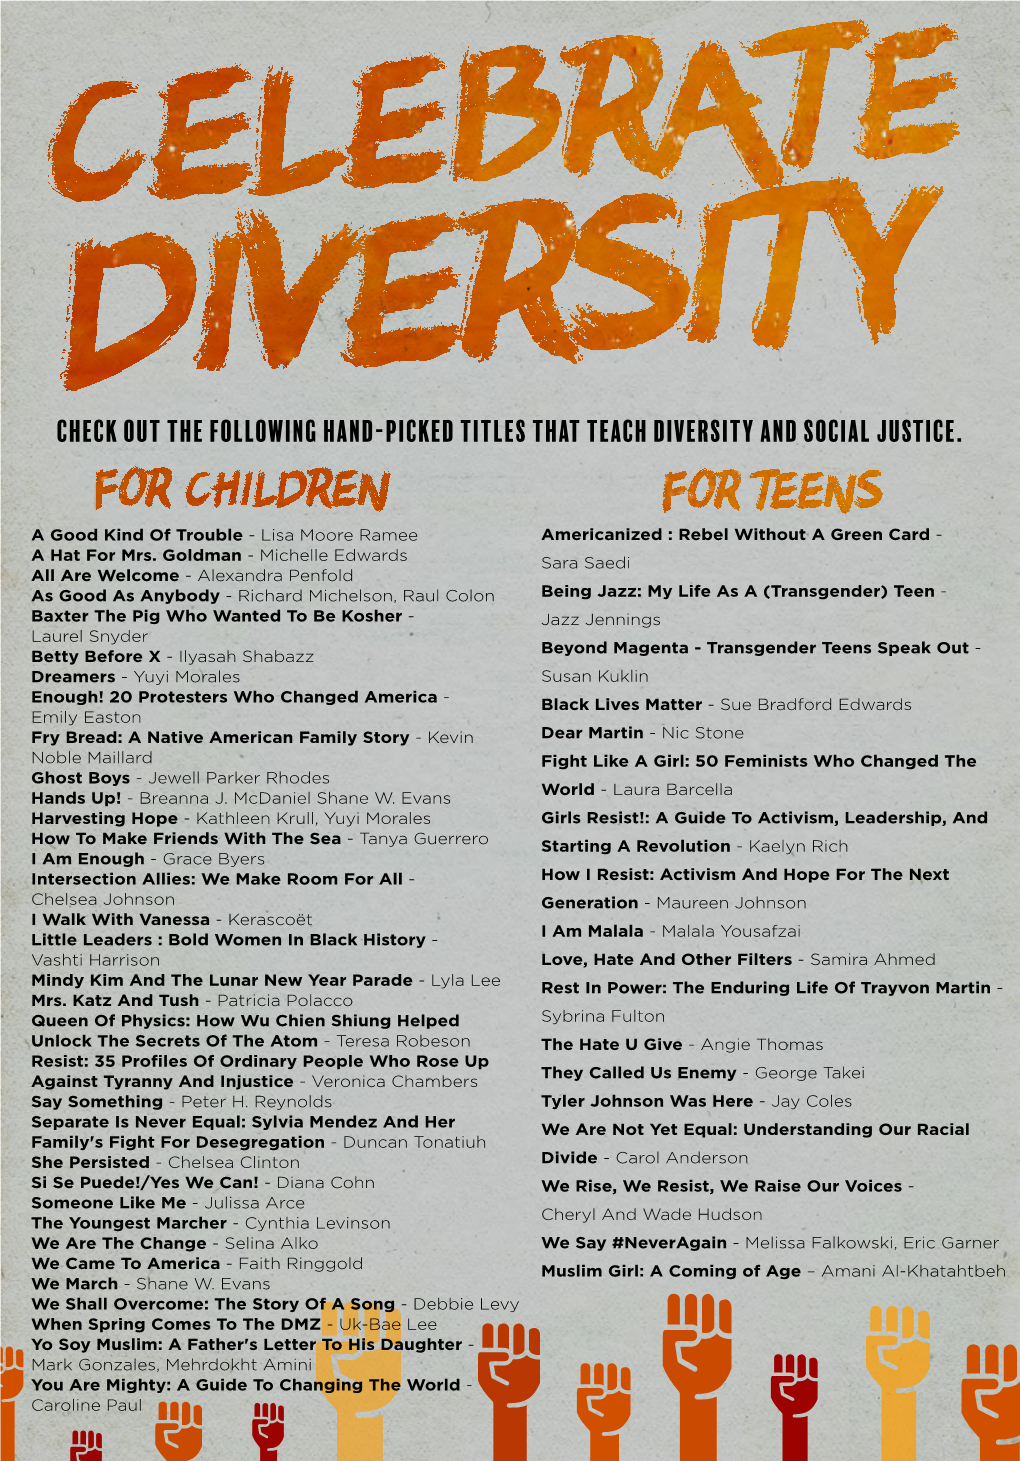 Check out the Following Hand-Picked Titles That Teach Diversity and Social Justice